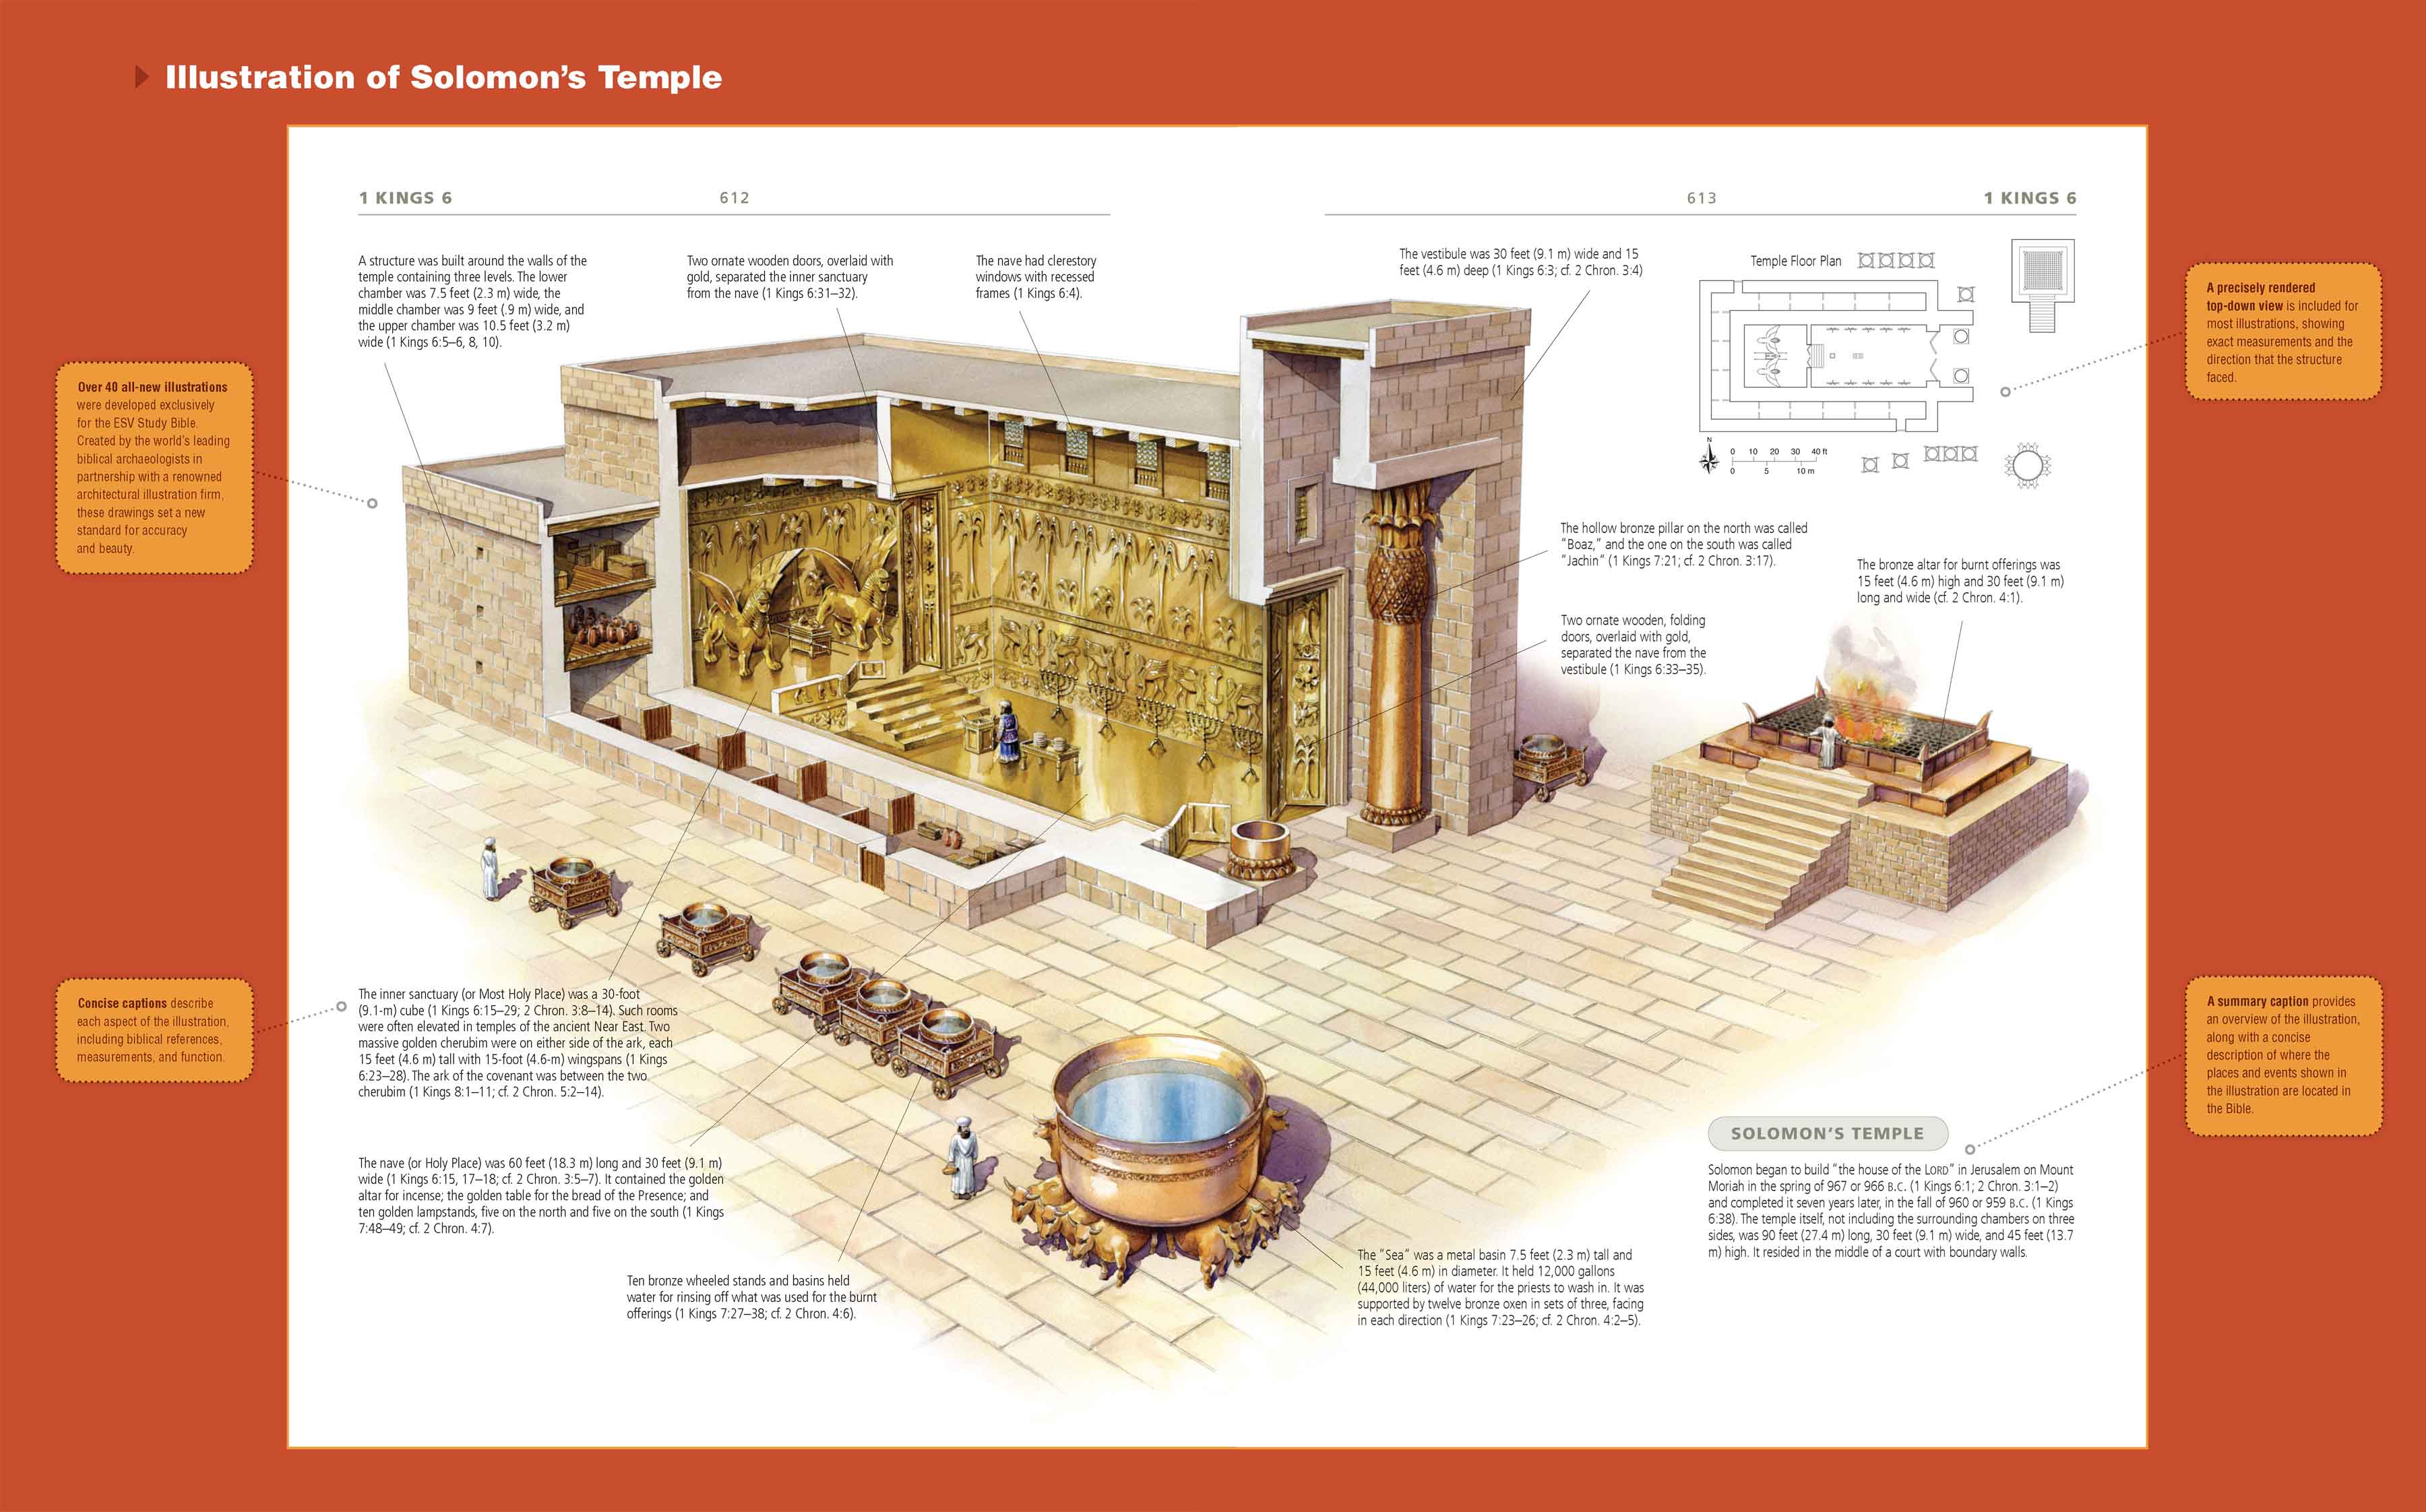 holy of holies diagram